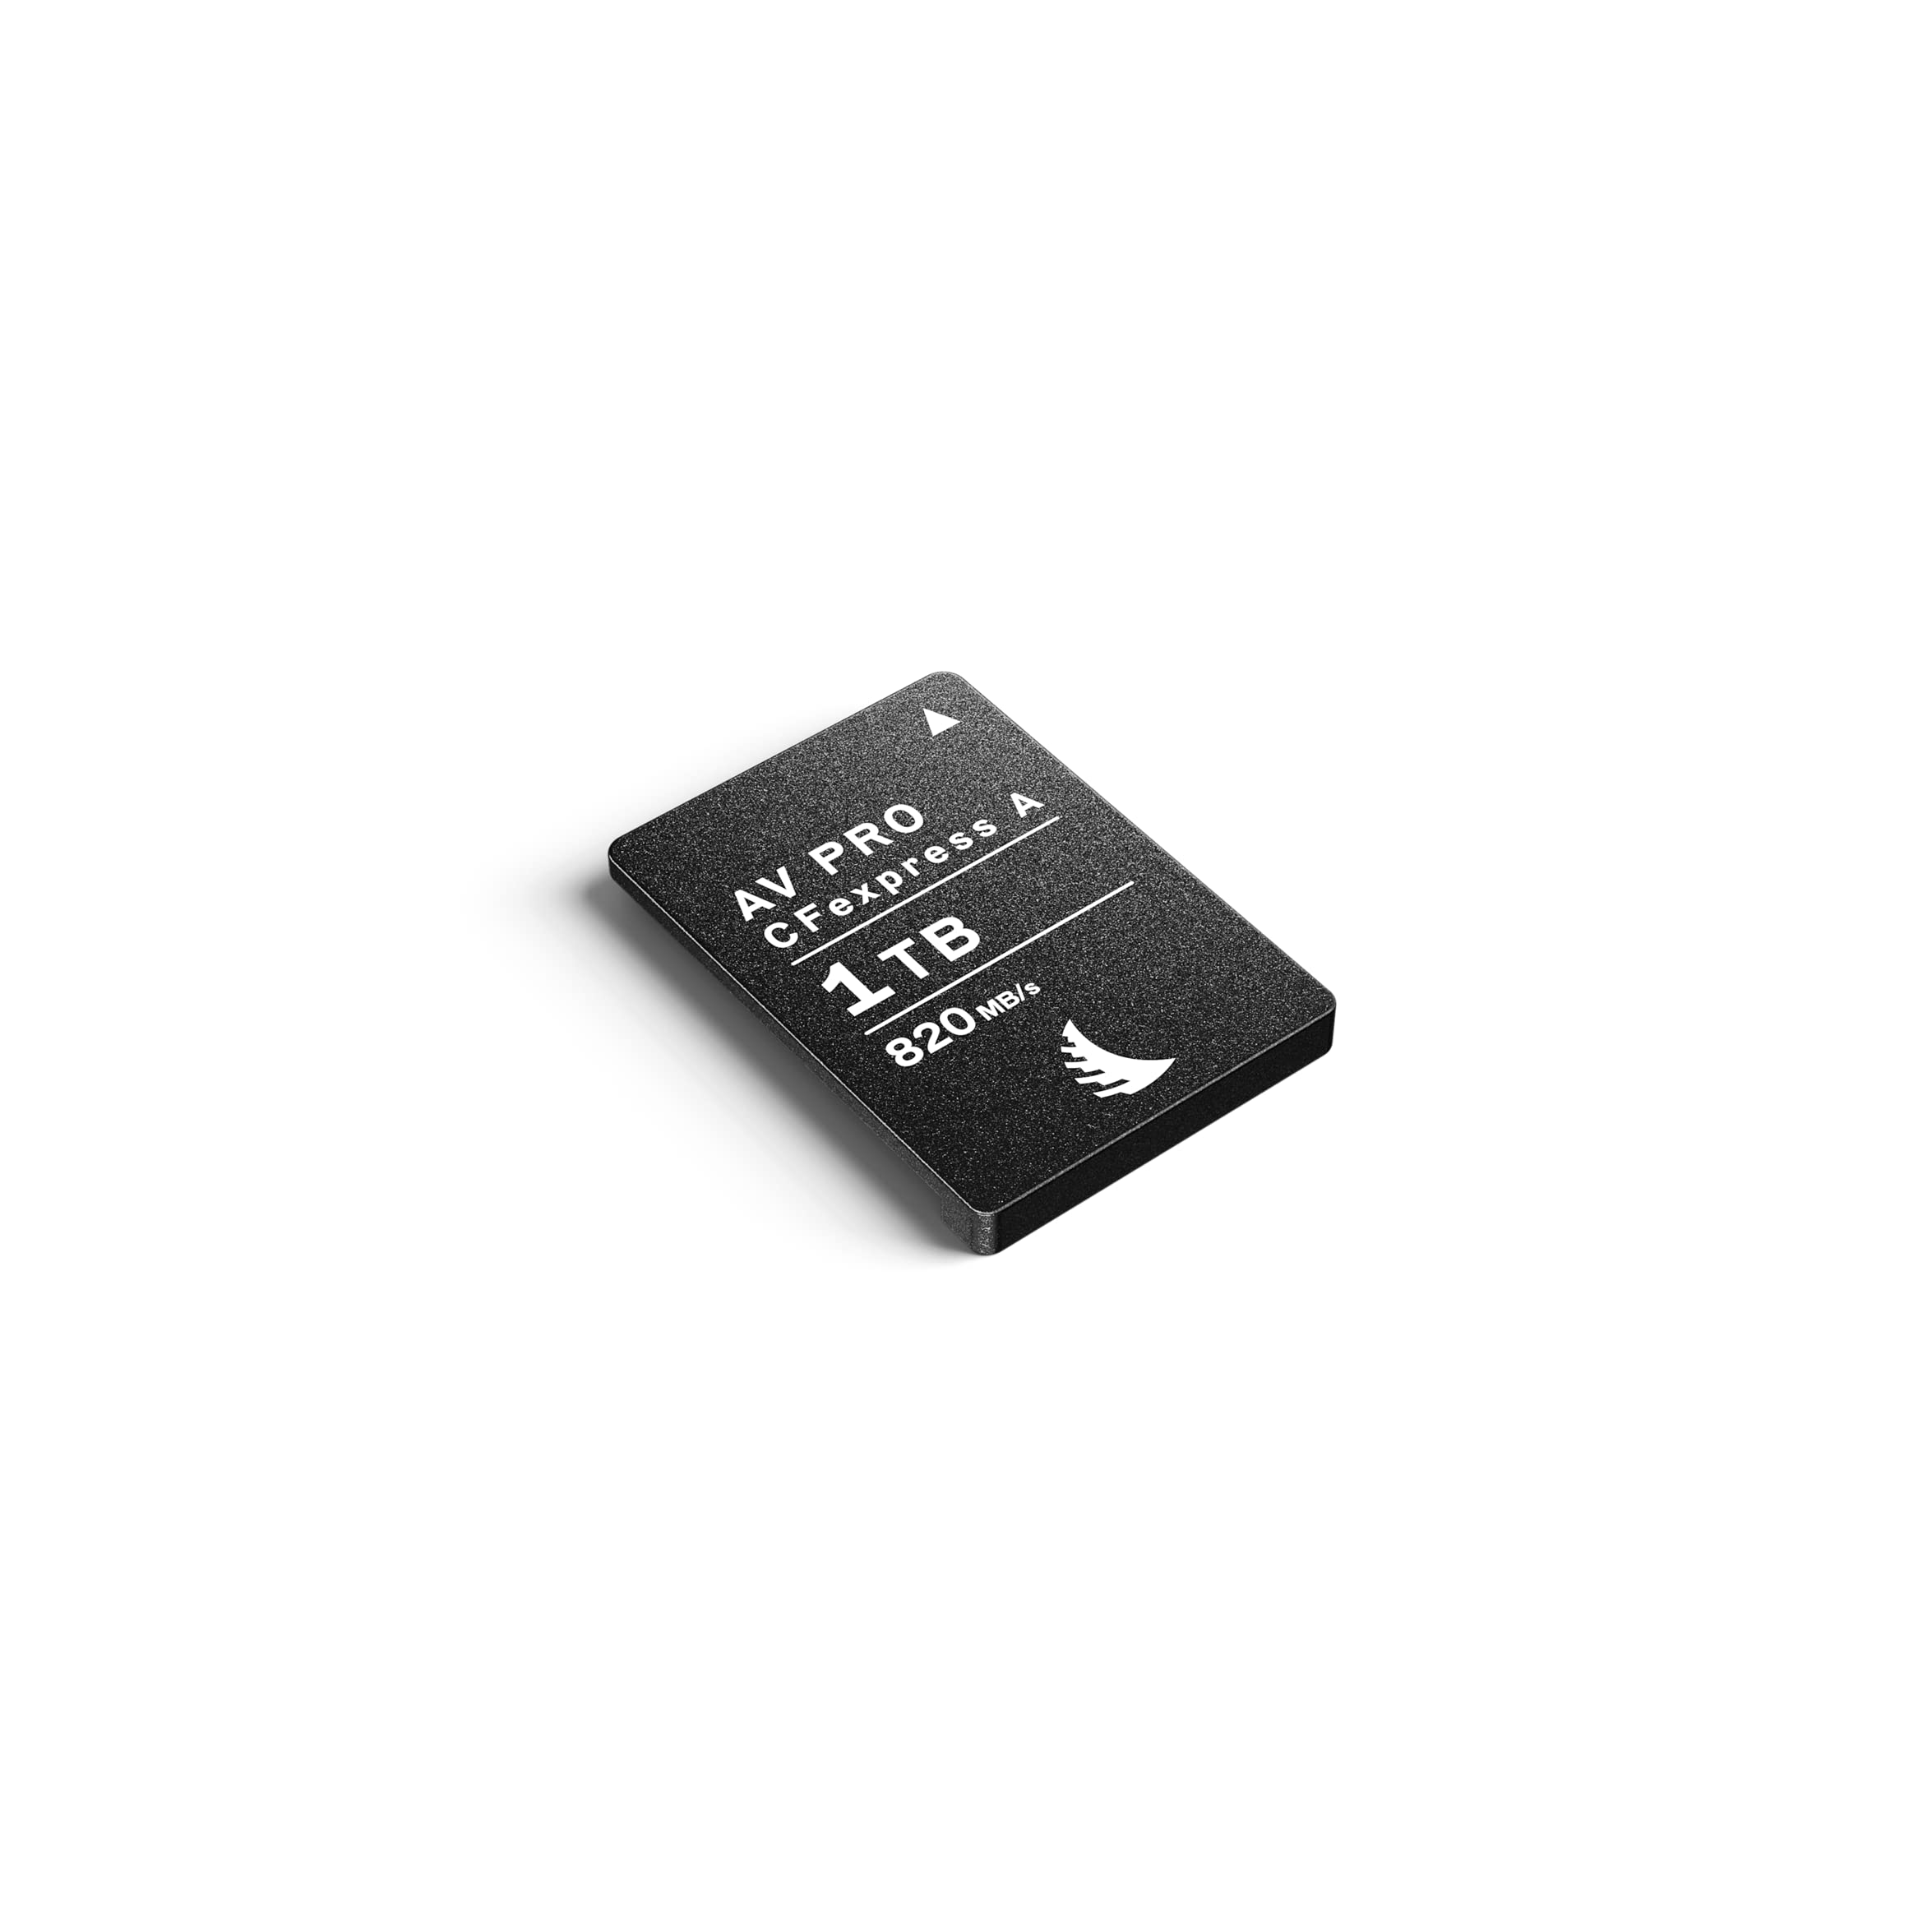 Angelbird - AV PRO CFexpress A Memory Card - 1 TB - High-Performance CFexpress Type A Media - Compatible with Sony Alpha Cameras - Sony FX Cameras - up to 8K RAW Video and Photo